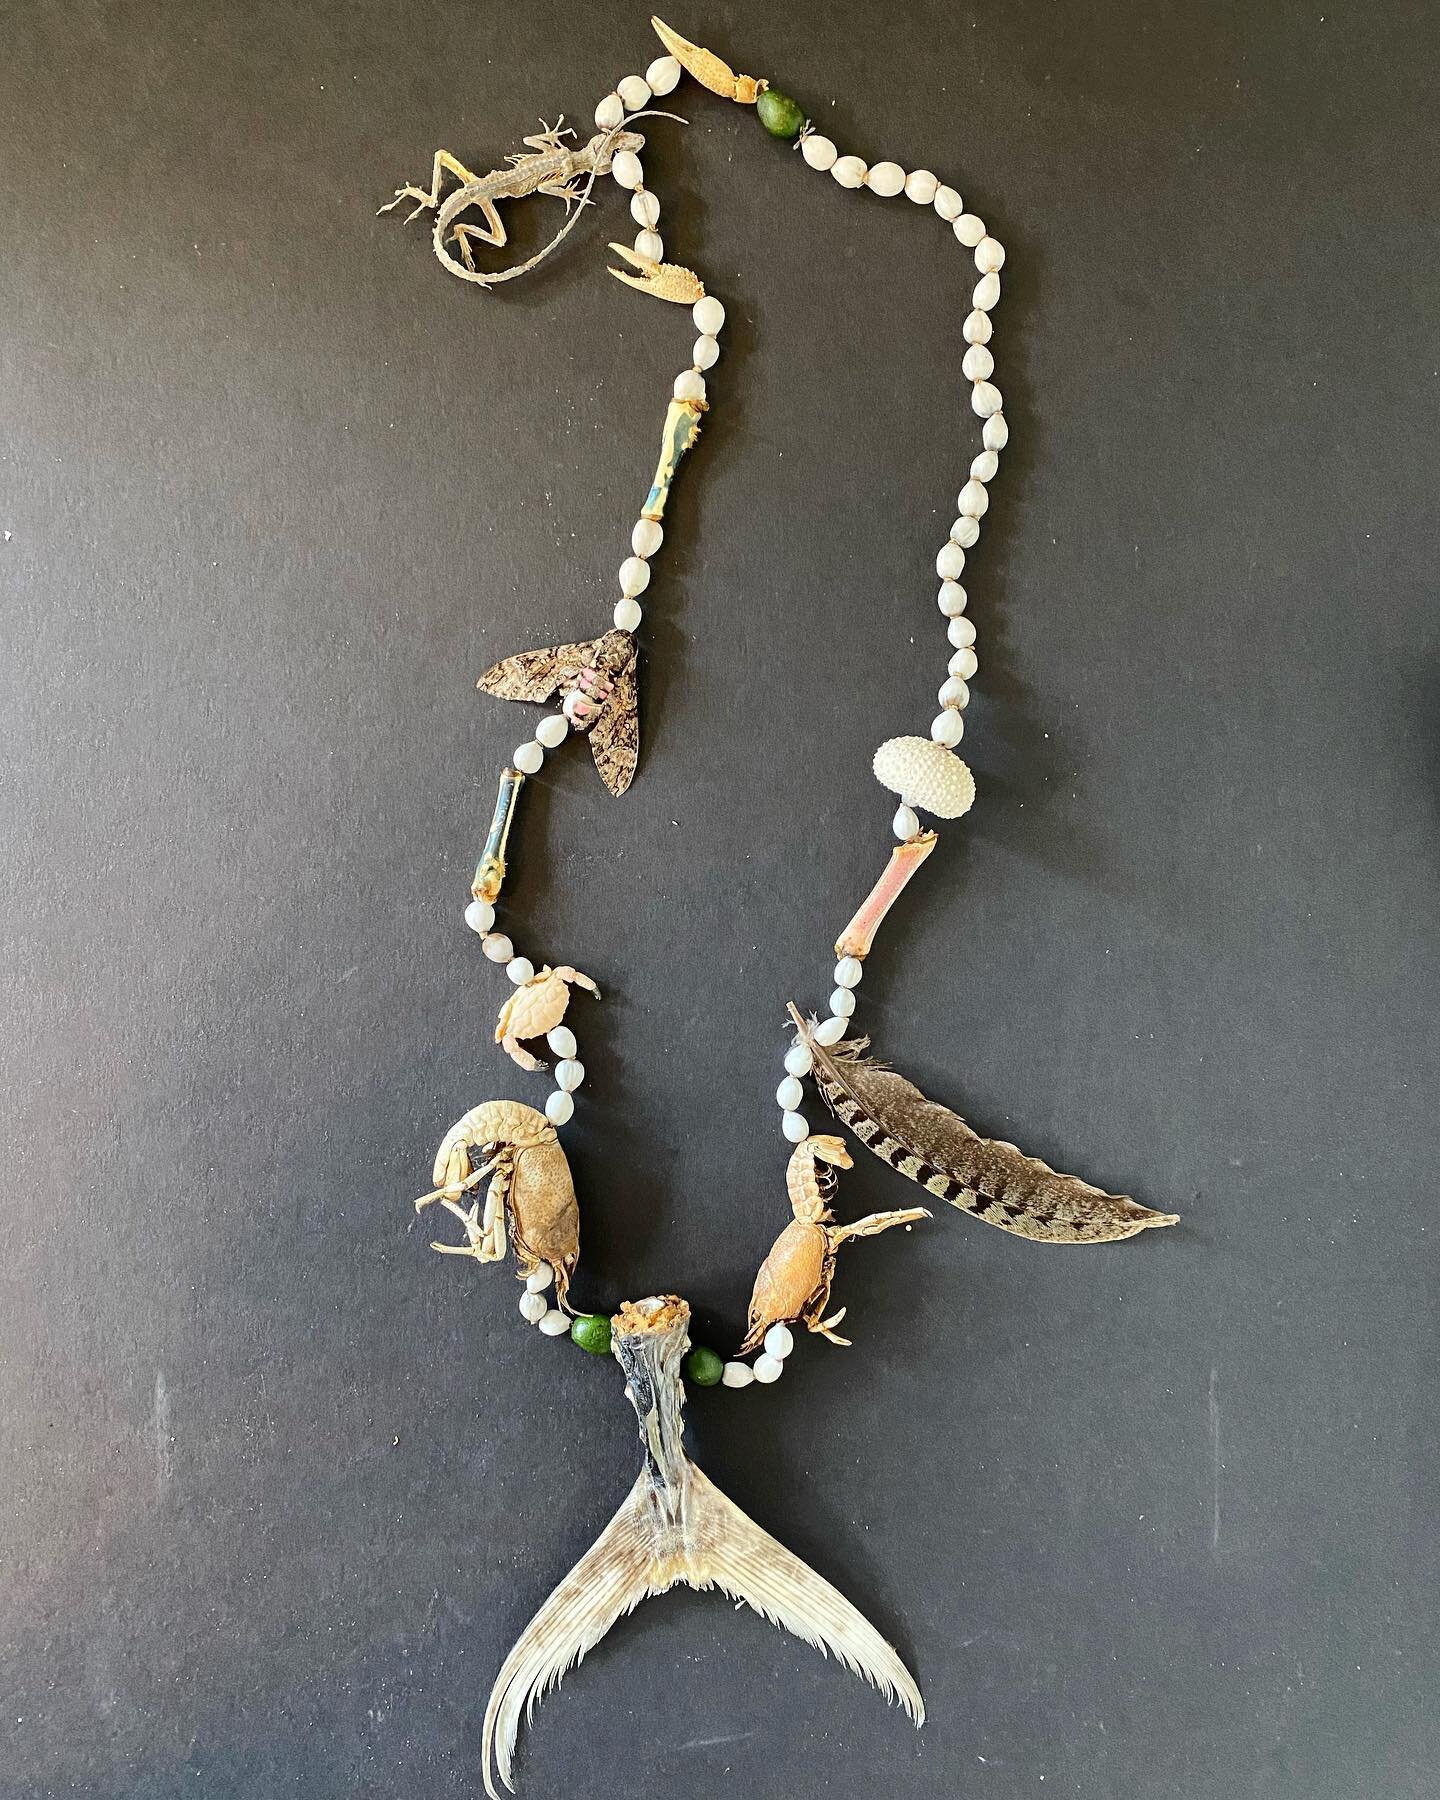 Whacky Wednesday Fauna Series, yes someone requested as weird of a lei as possible, the female recipient loves it, and yes if anyone has anything they would like to donate please keep us in mind! Gladly accepting small fish tails, fossil geckos, skel